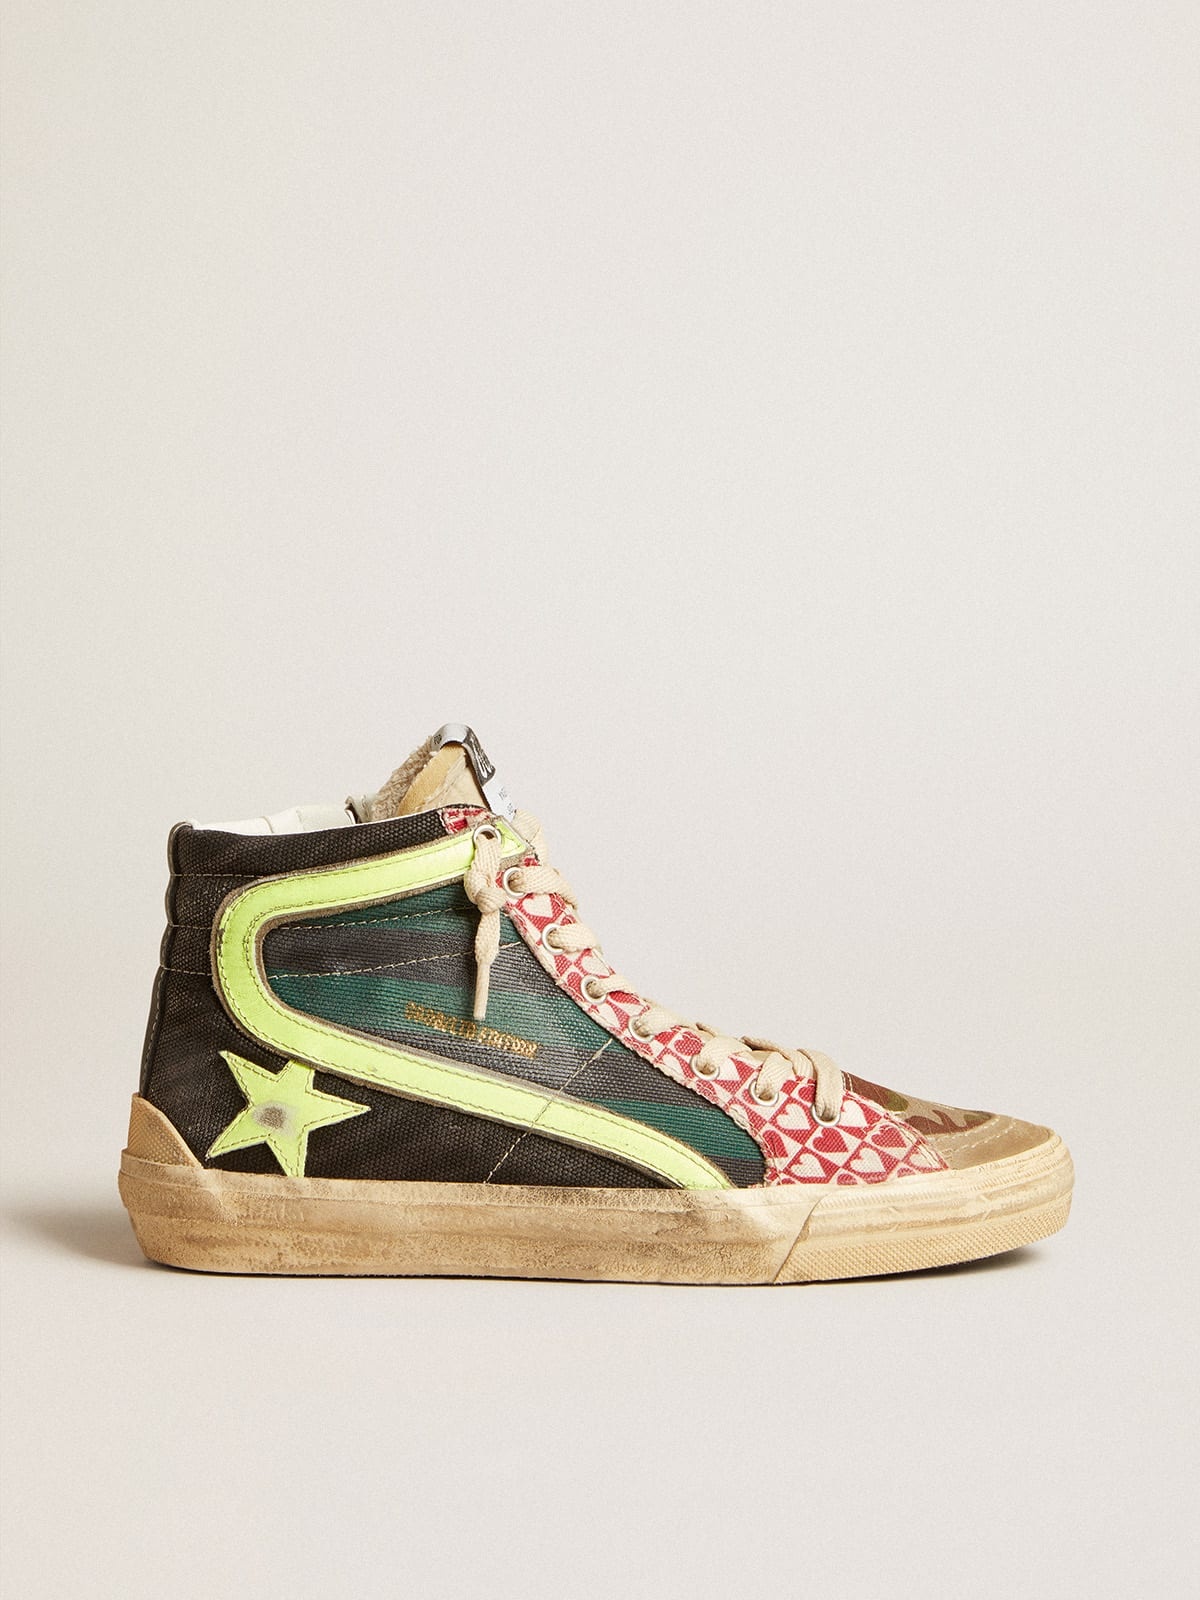 Golden Goose Men's Slide LAB in camo canvas with yellow leather star and  flash | REVERSIBLE